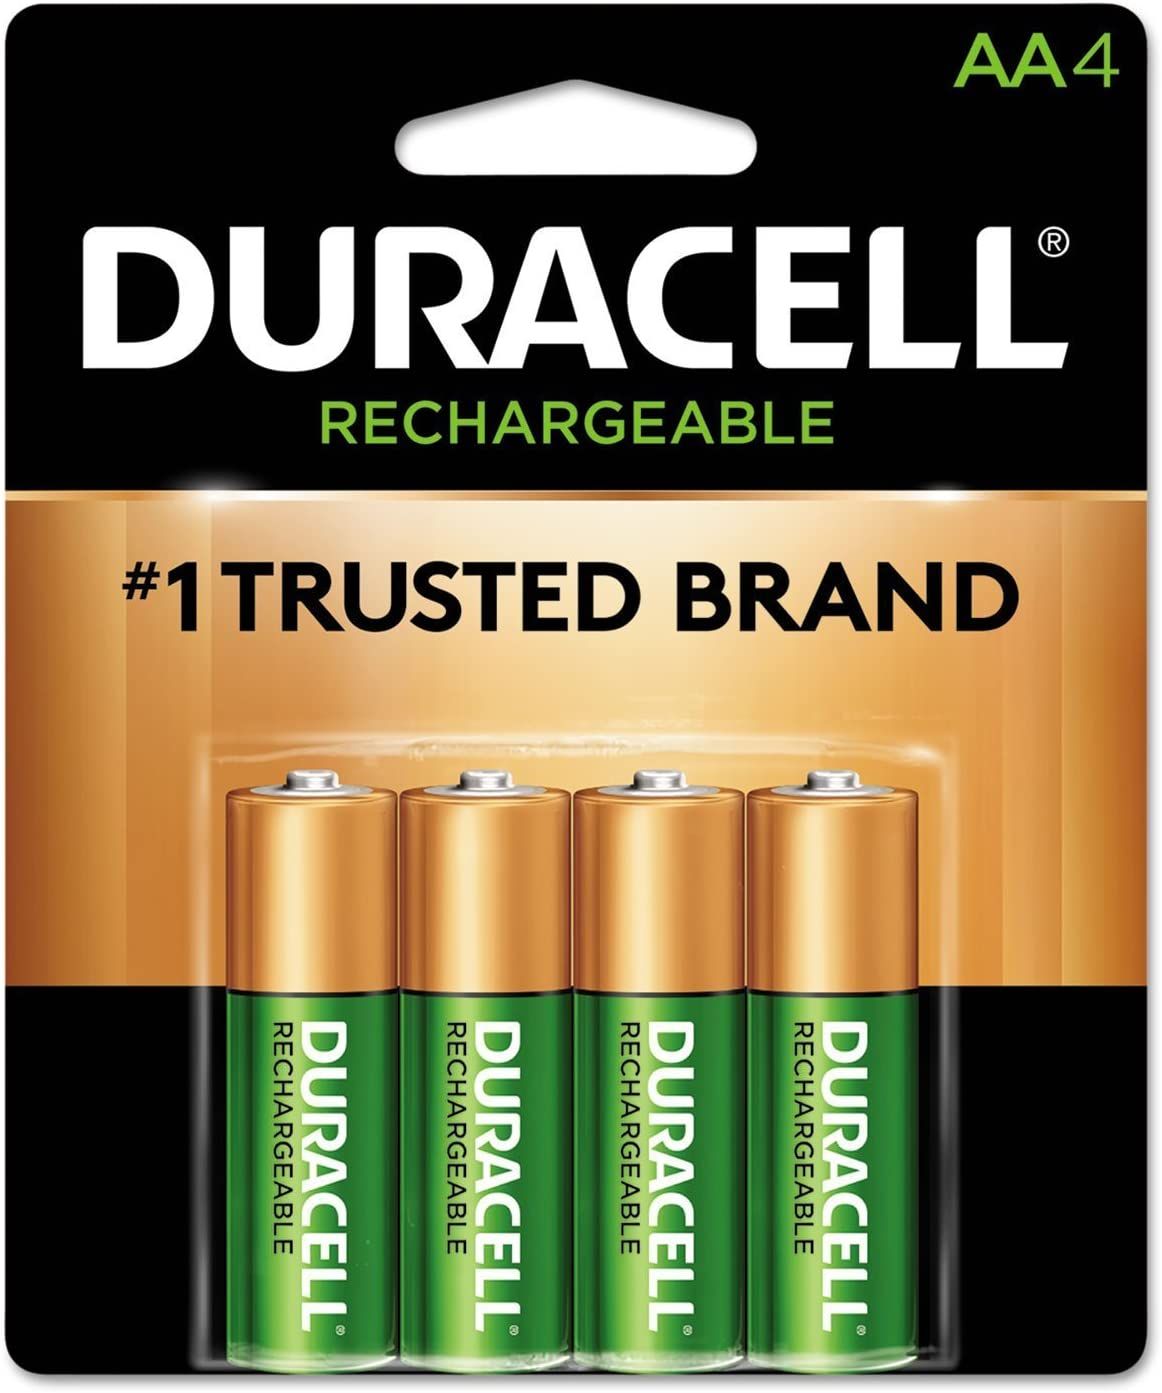 The 7 Best Rechargeable Batteries for Your Devices